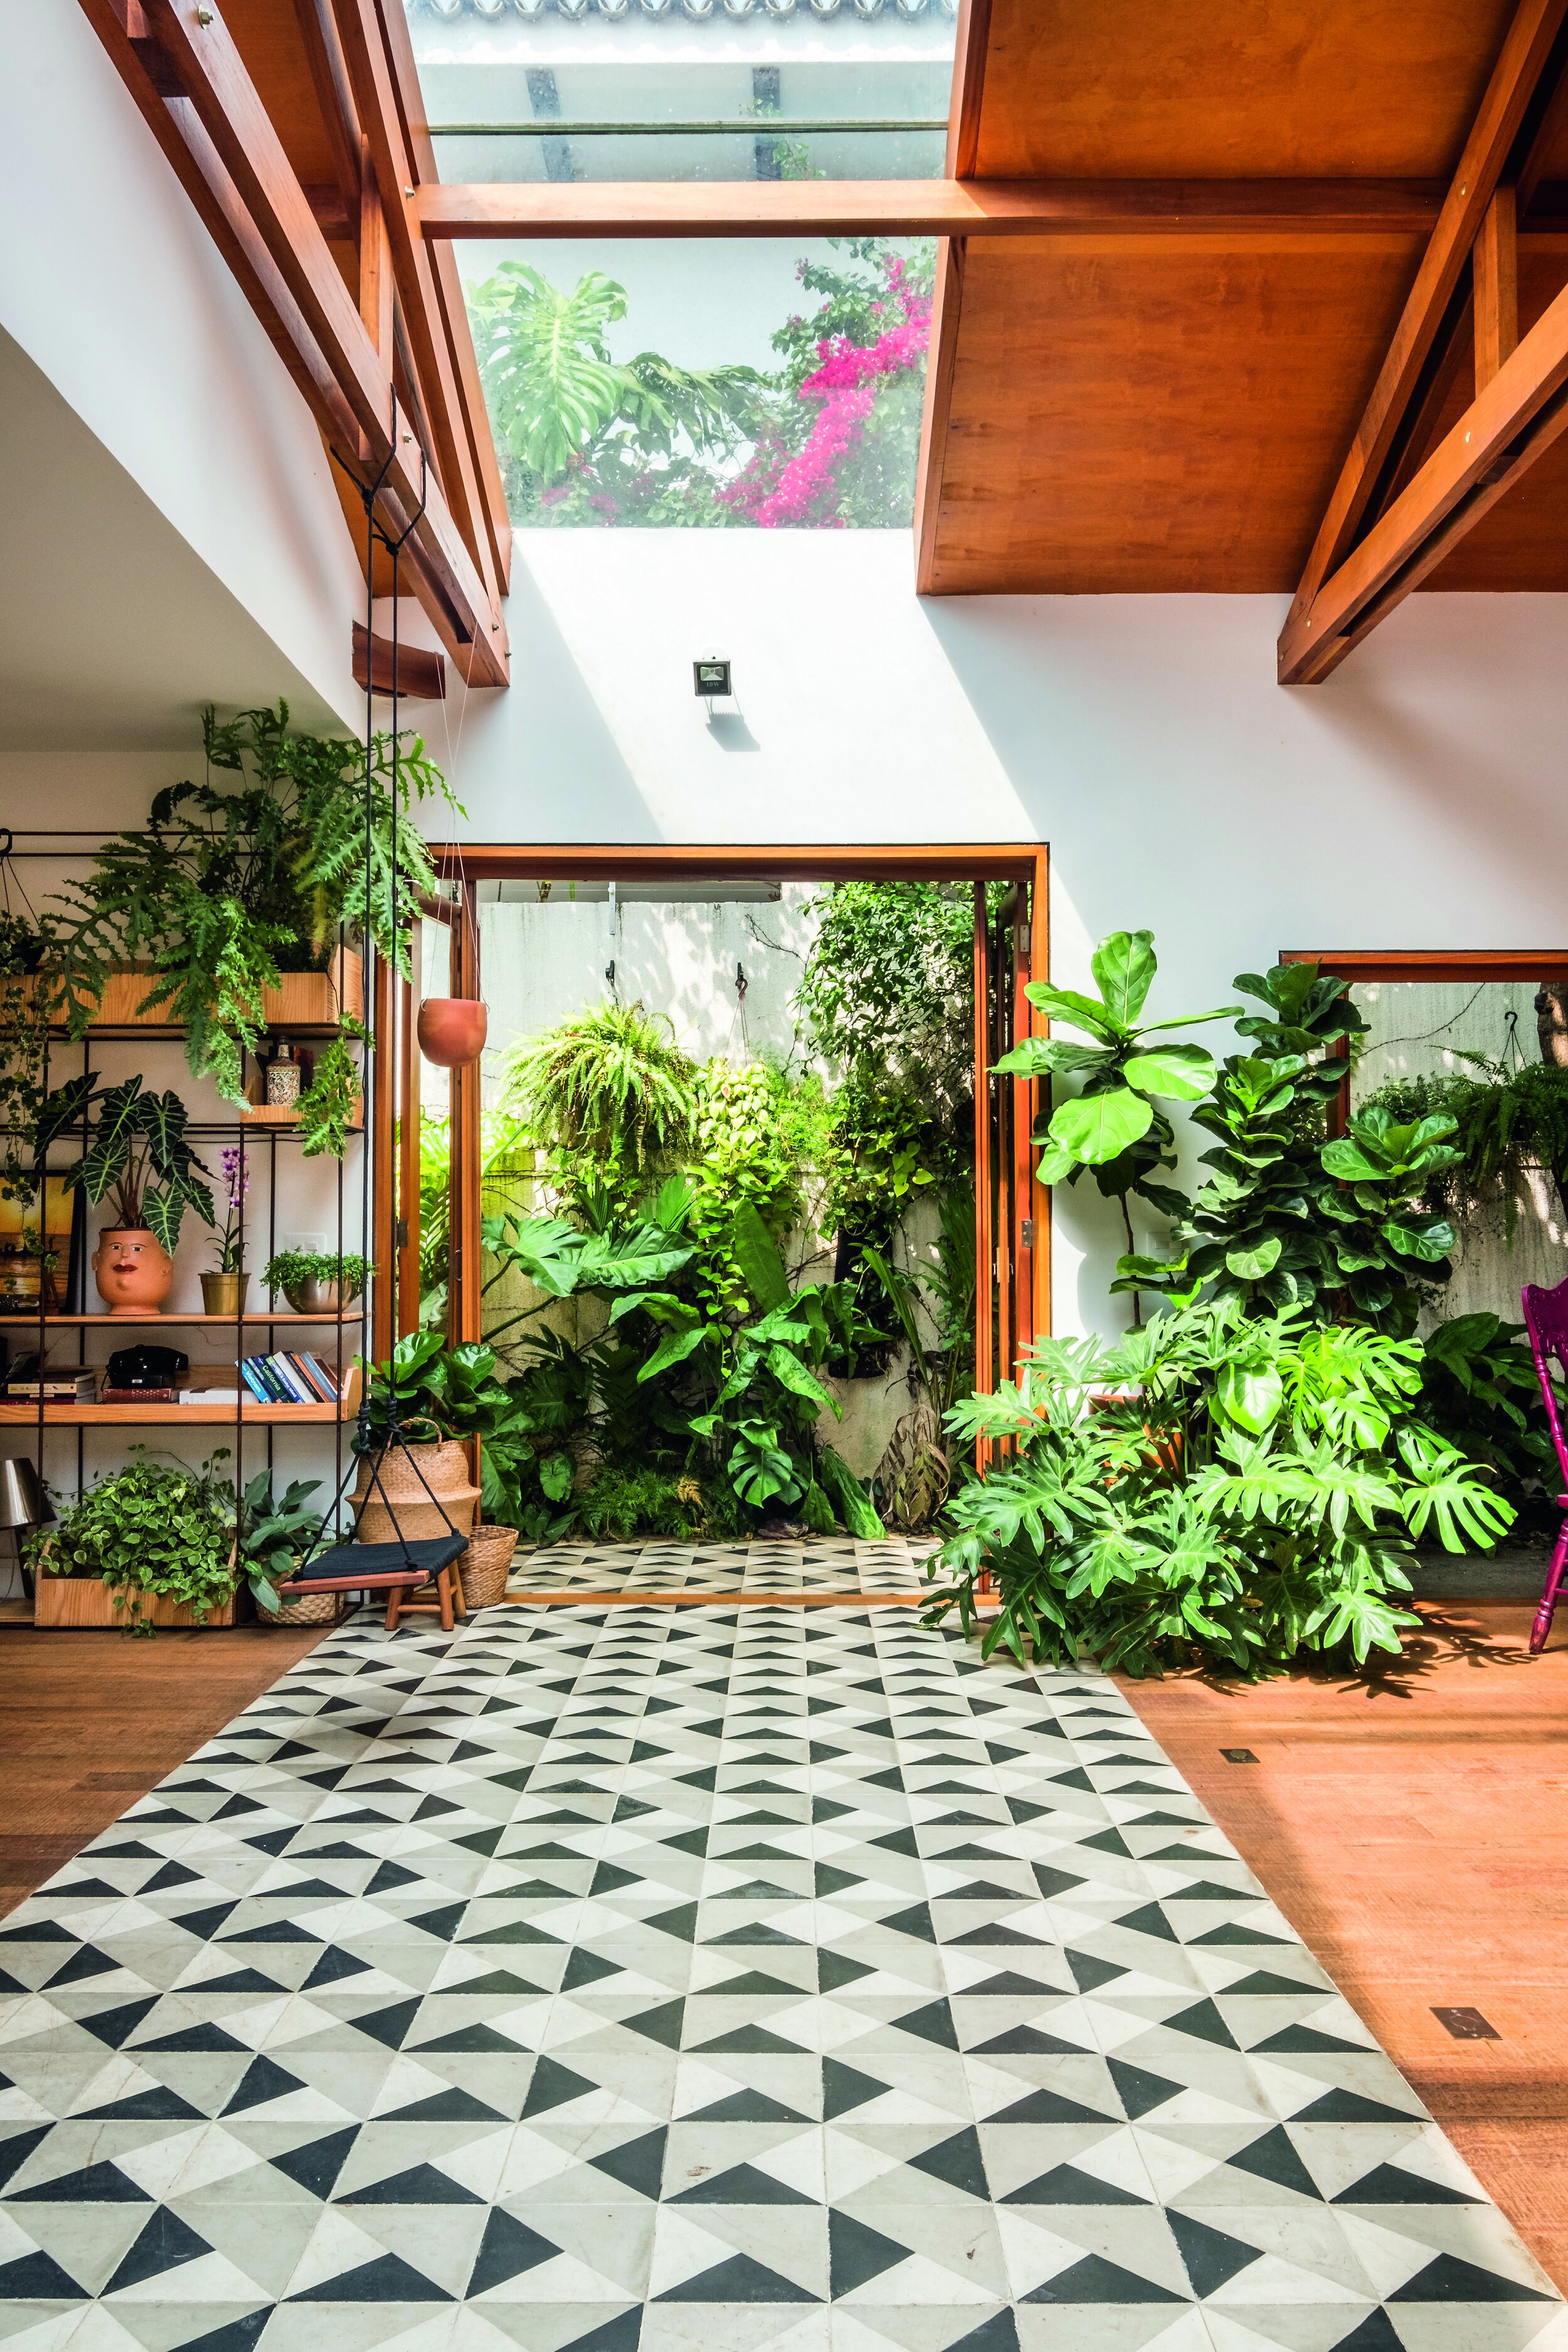 interior with geometric floor tiles and lots of greenery both inside and out